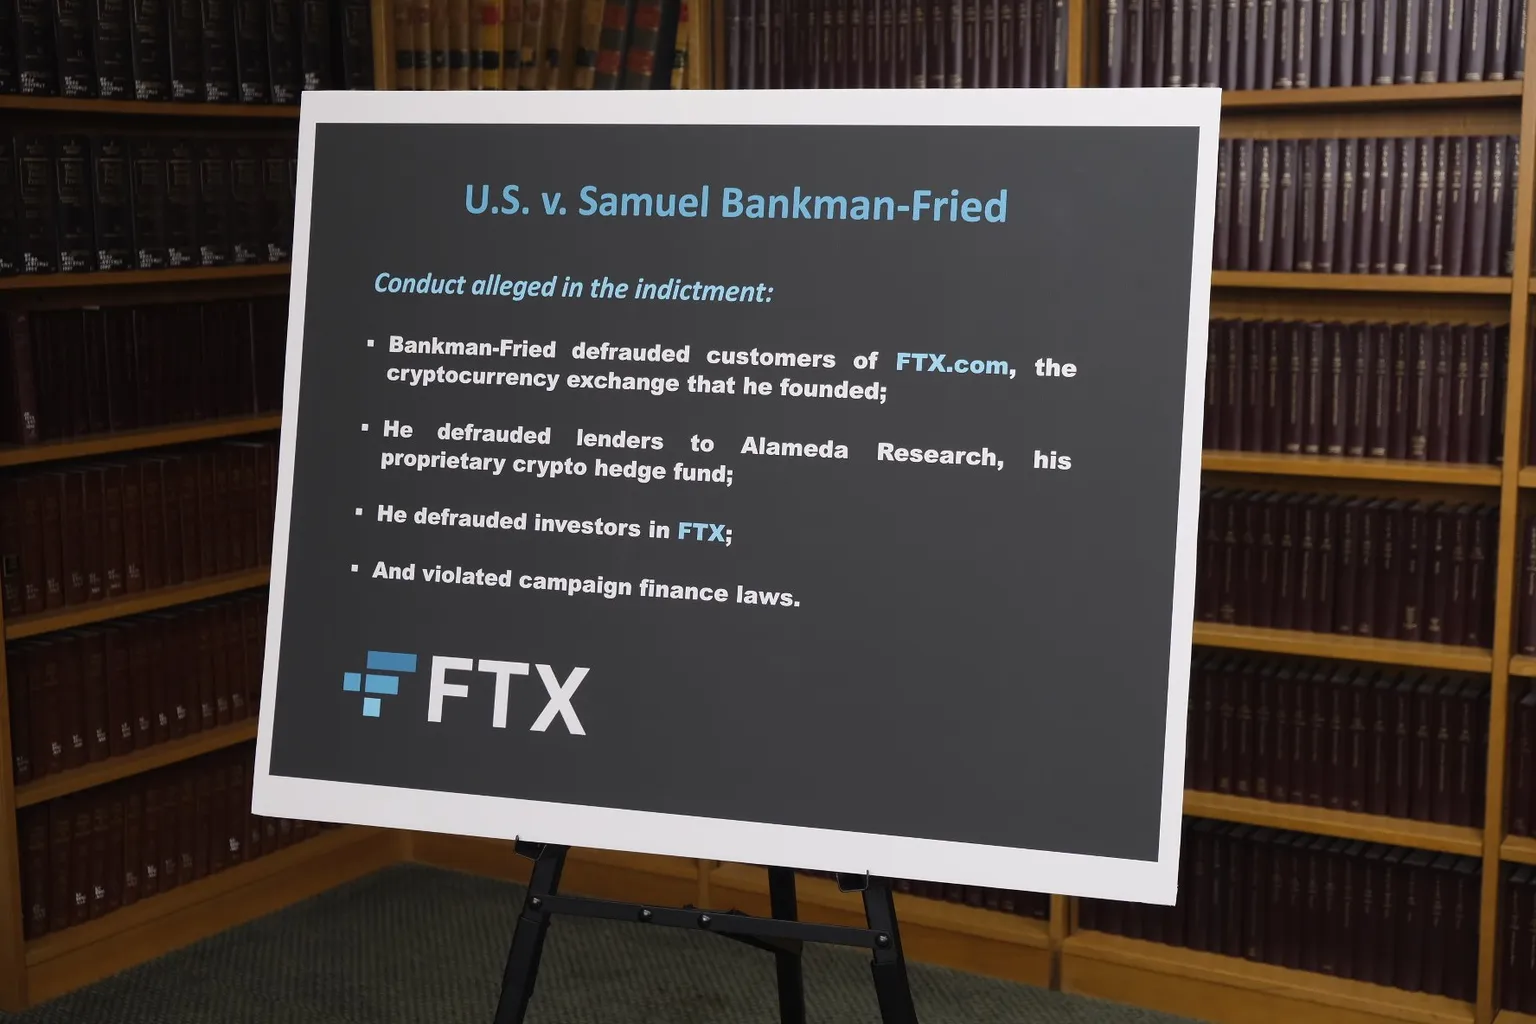 A visual compilation of the charges against Bankman-Fried.